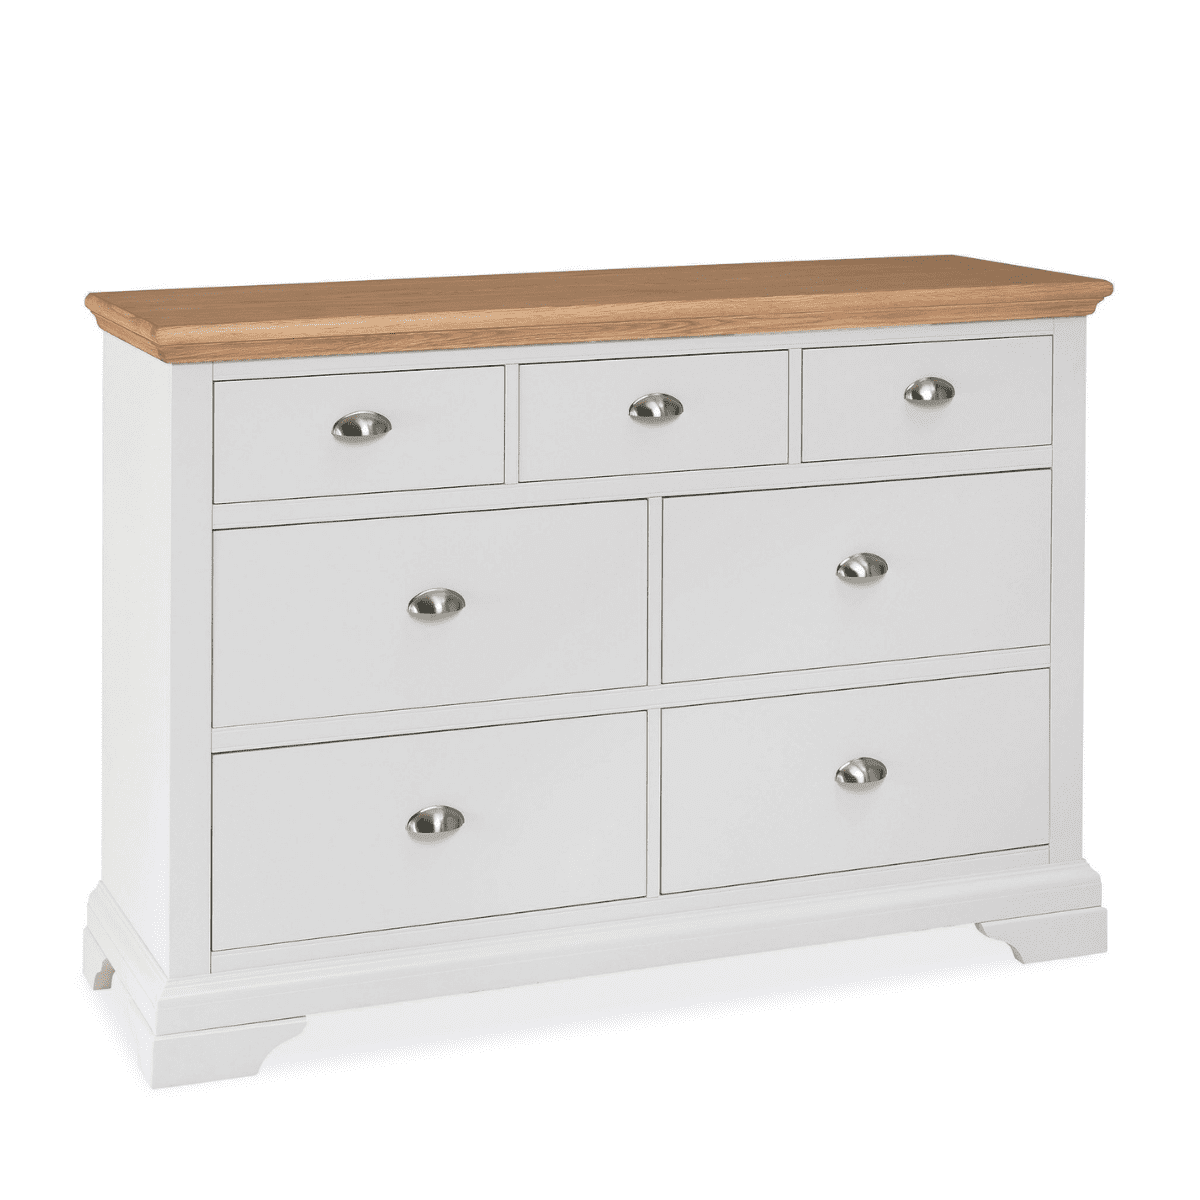 Hanoi Two Tone White Drawers with Wood Top